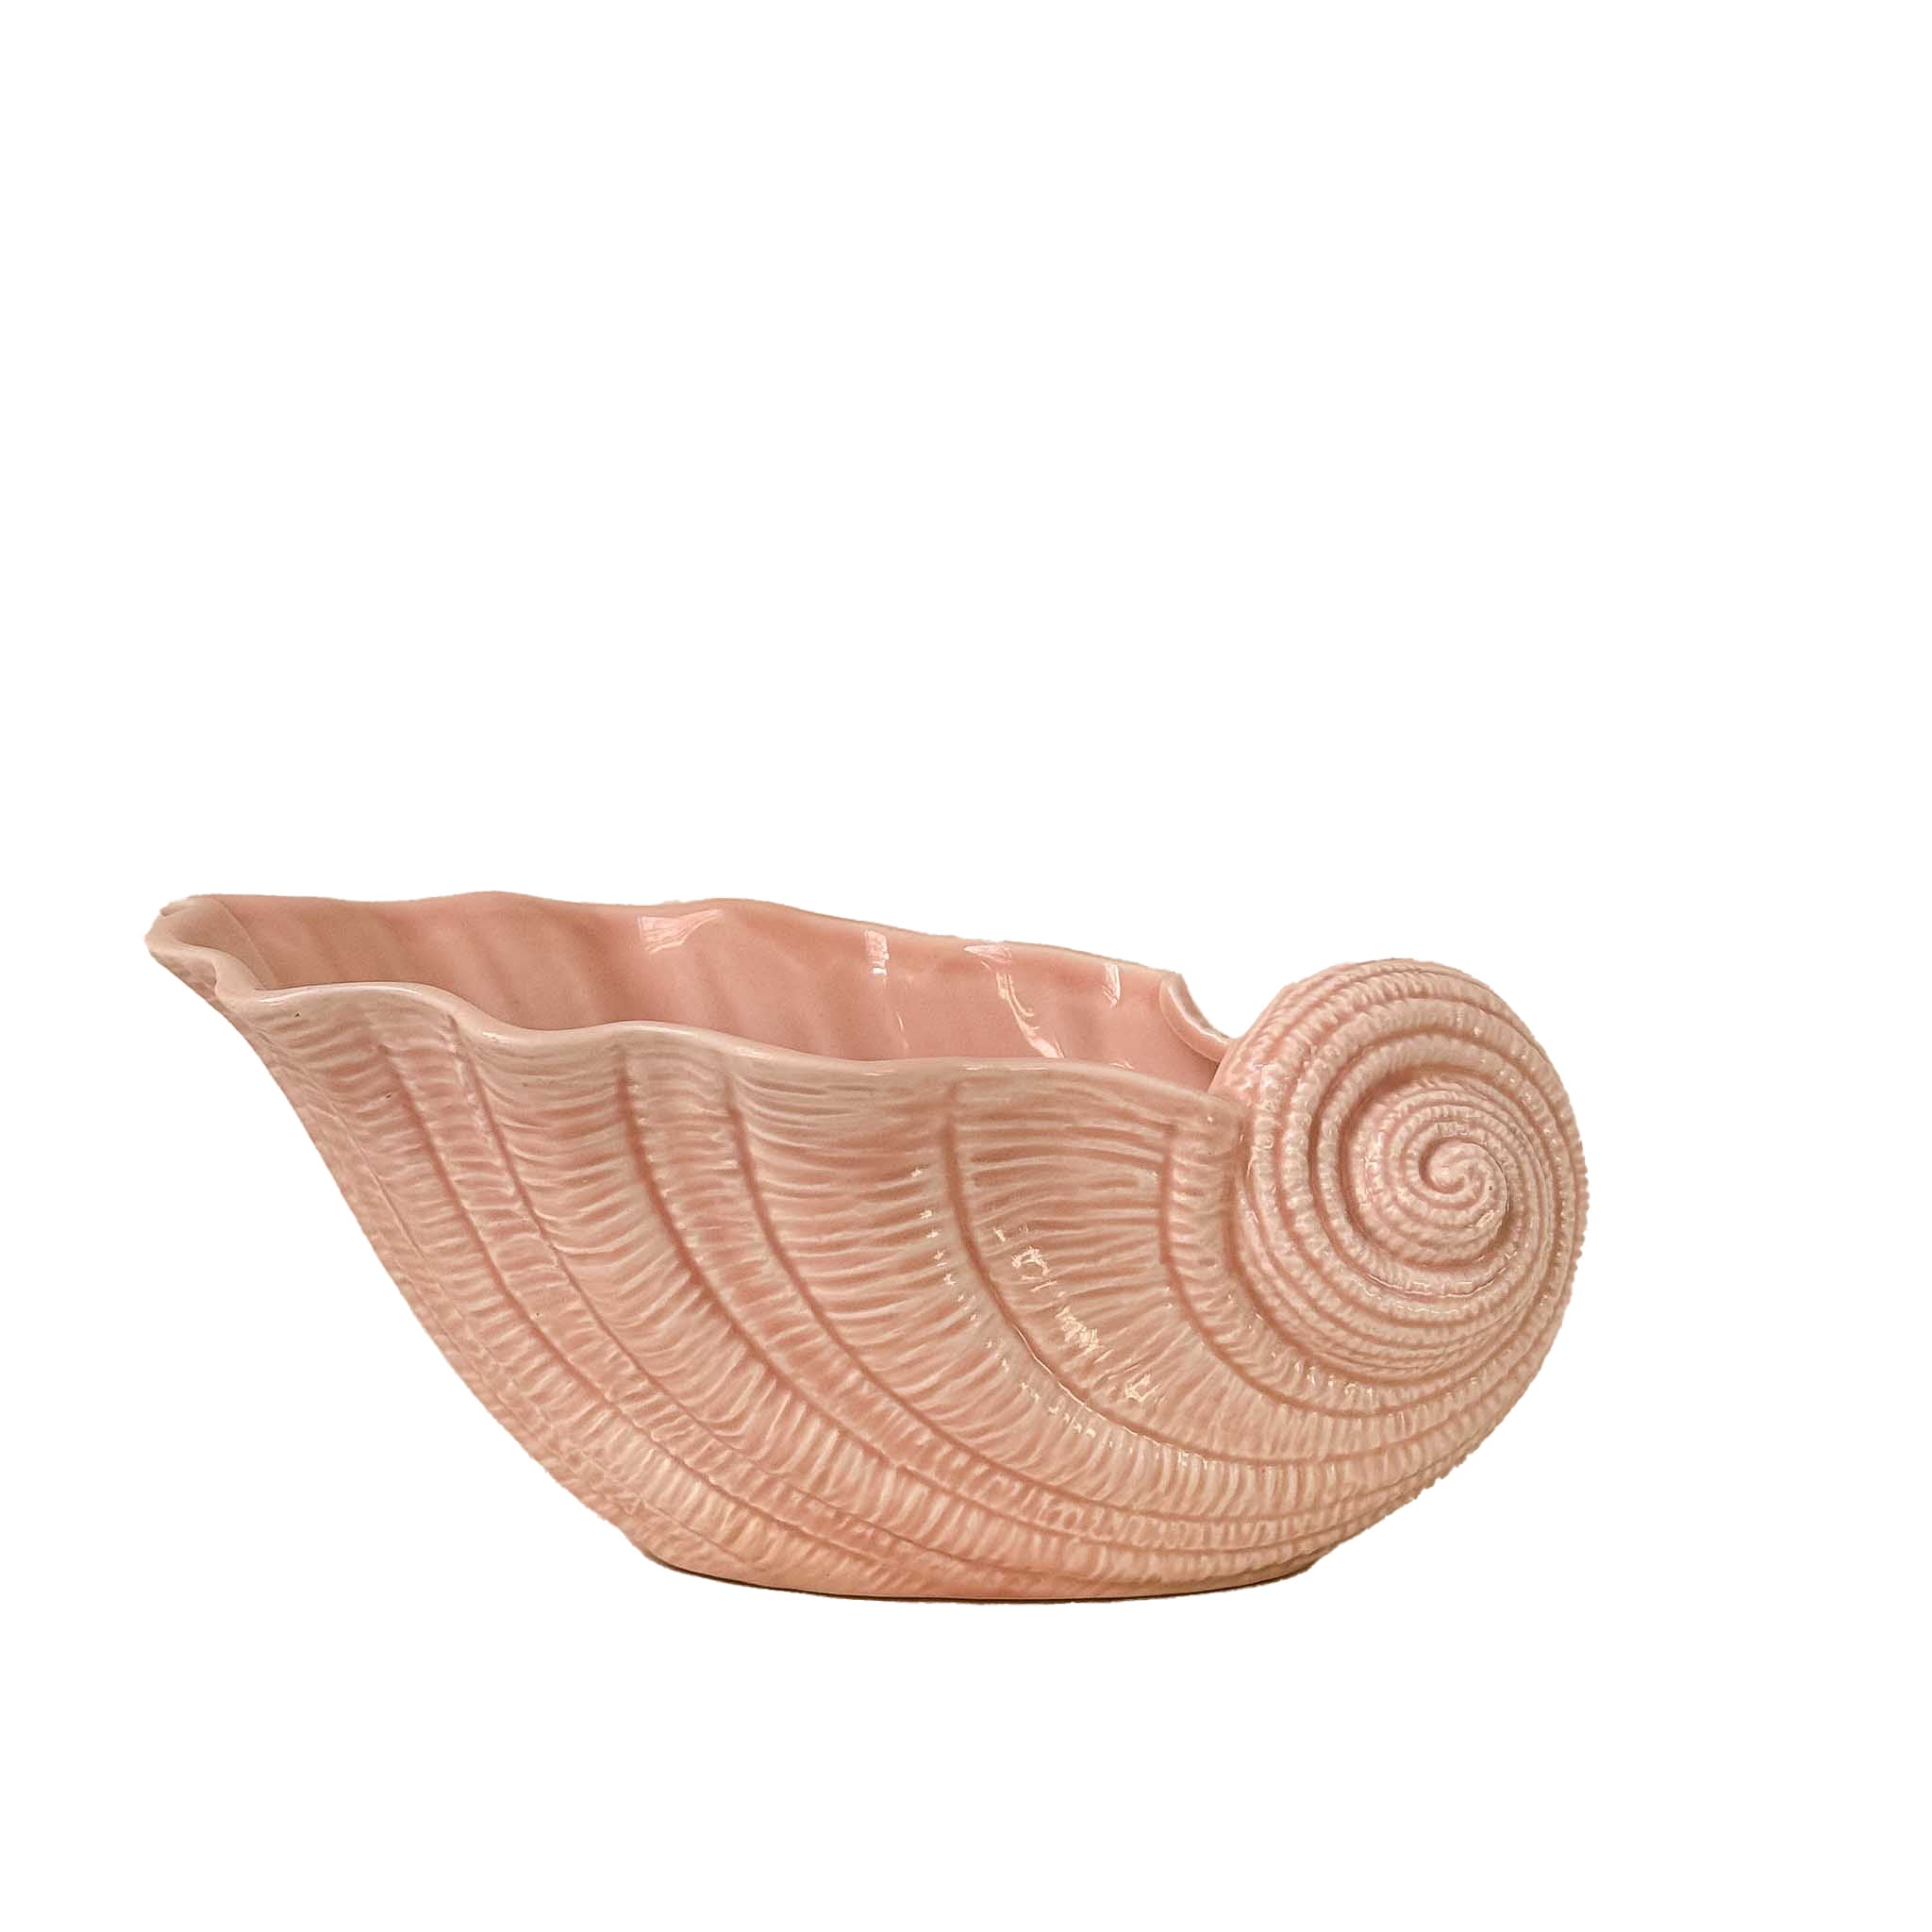 Vintage Pale Pink Conch Shell Planter